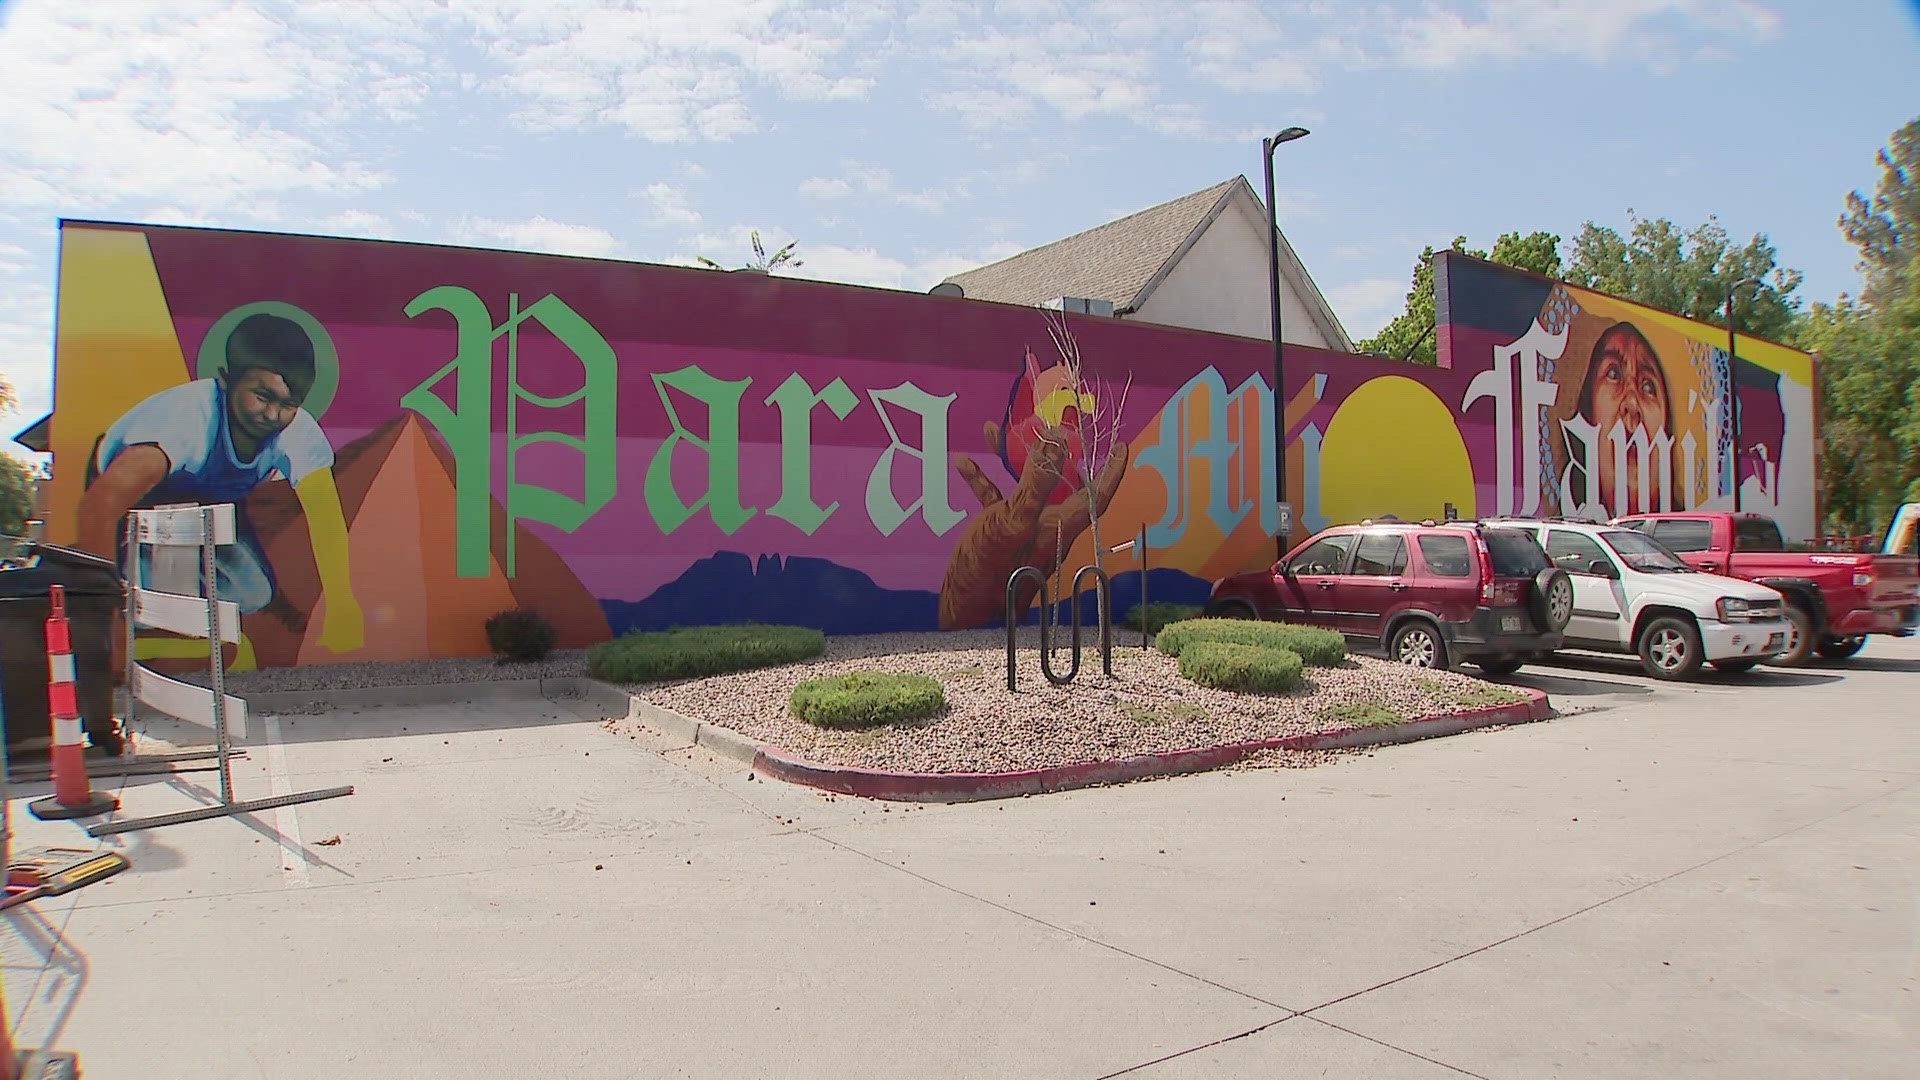 The mural can be found on the side of Los Tarascos Restaurant on College Avenue in Fort Collins.